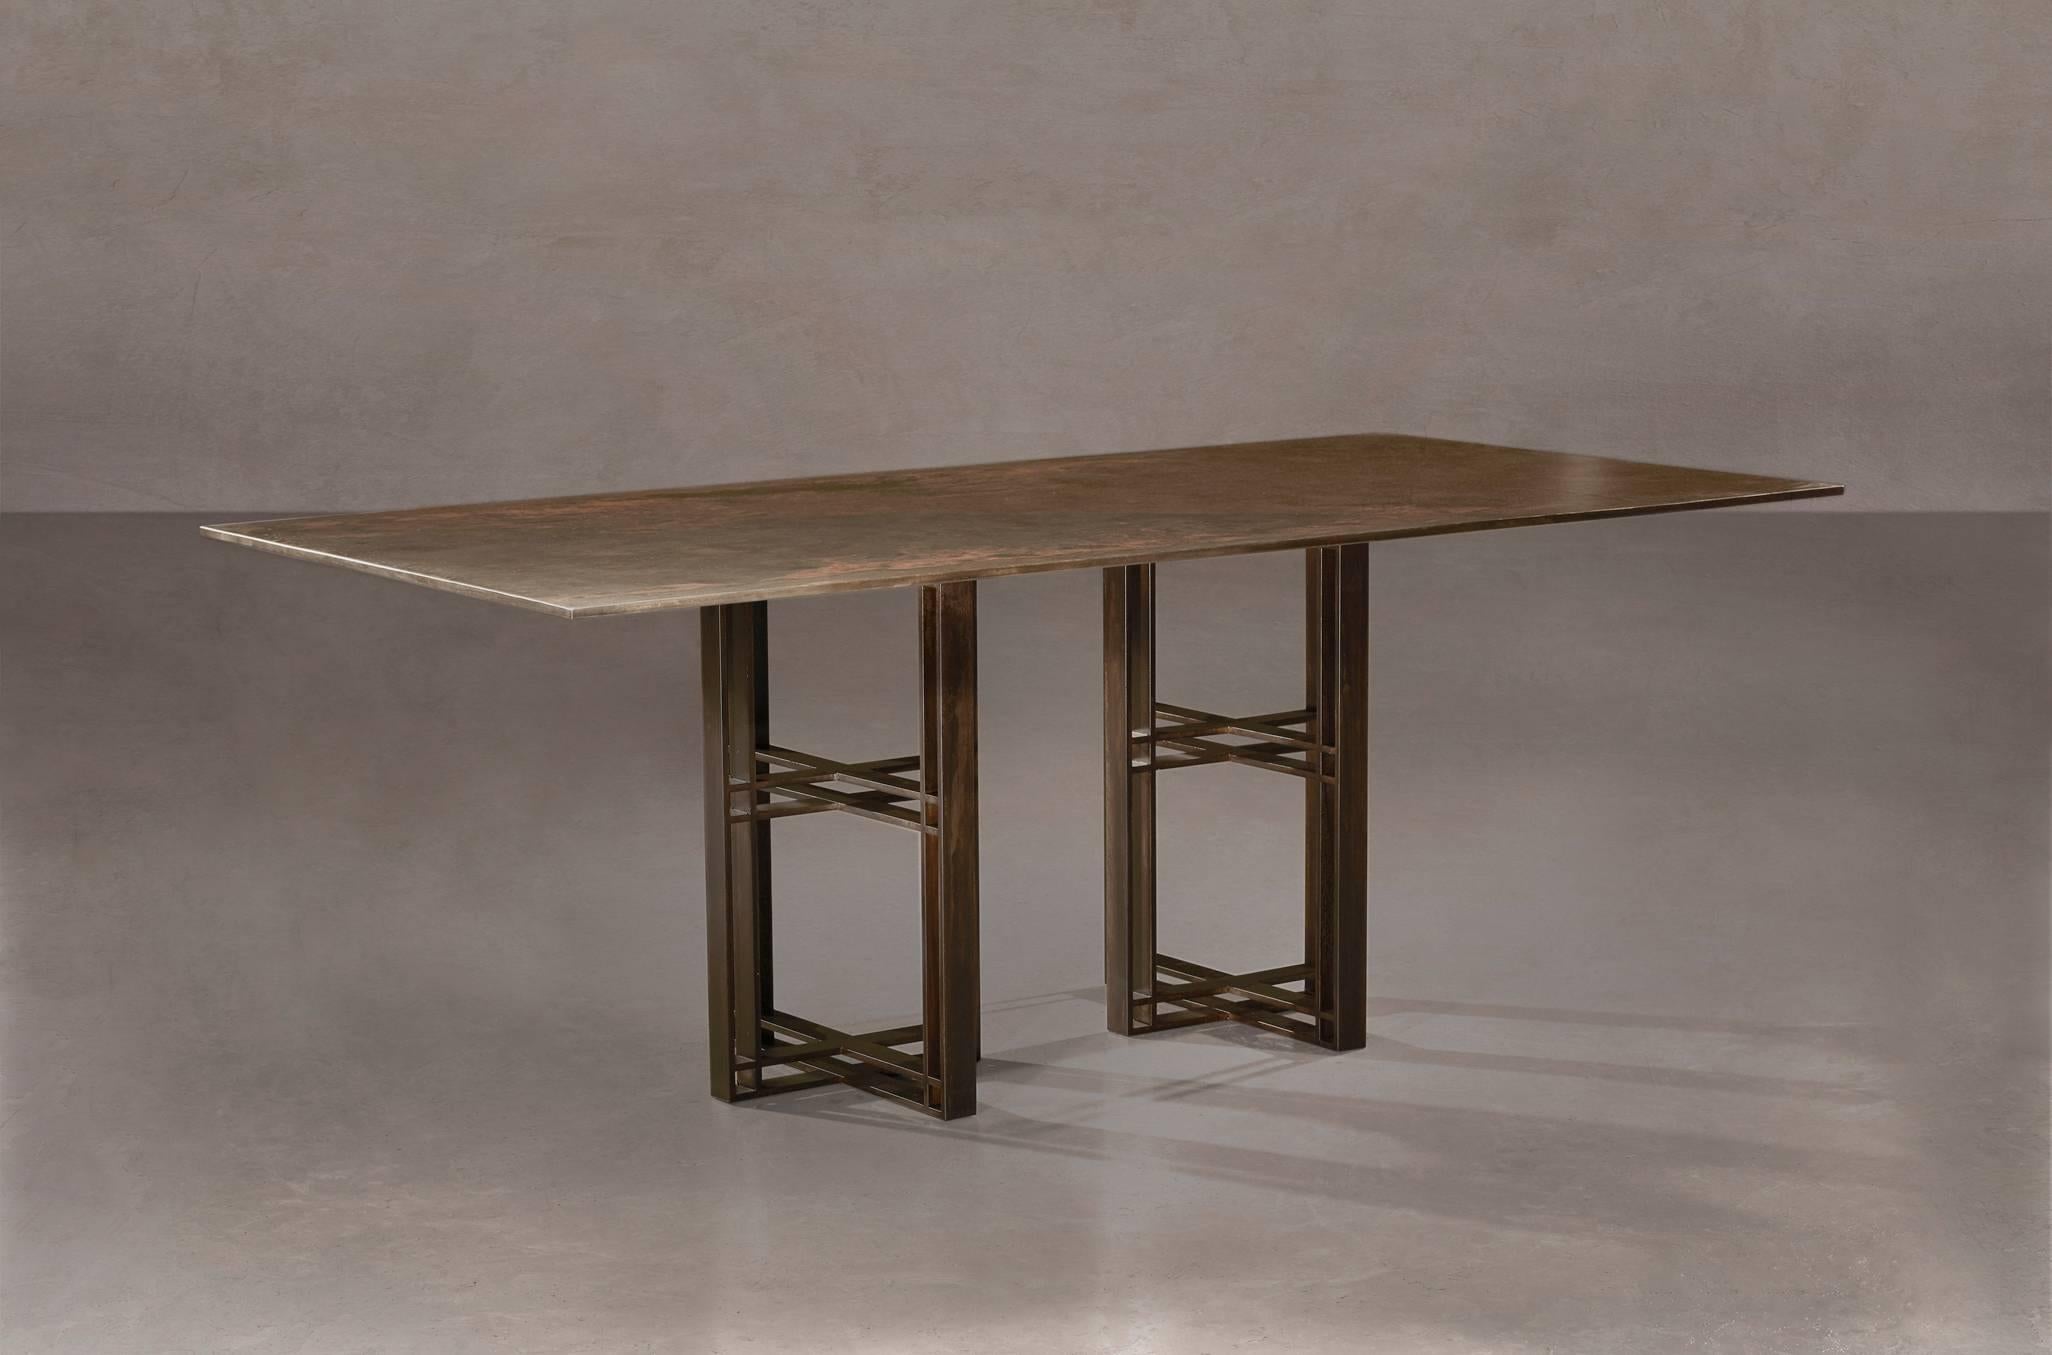 A dining table in patinated steel. Hand crafted in the North to order. Custom sizes and finishes are available.

Measures: 230 cm (width) x 75 cm (height) x 110 cm (depth).
Custom sizes available. Available with marble or timber top.

Made to order